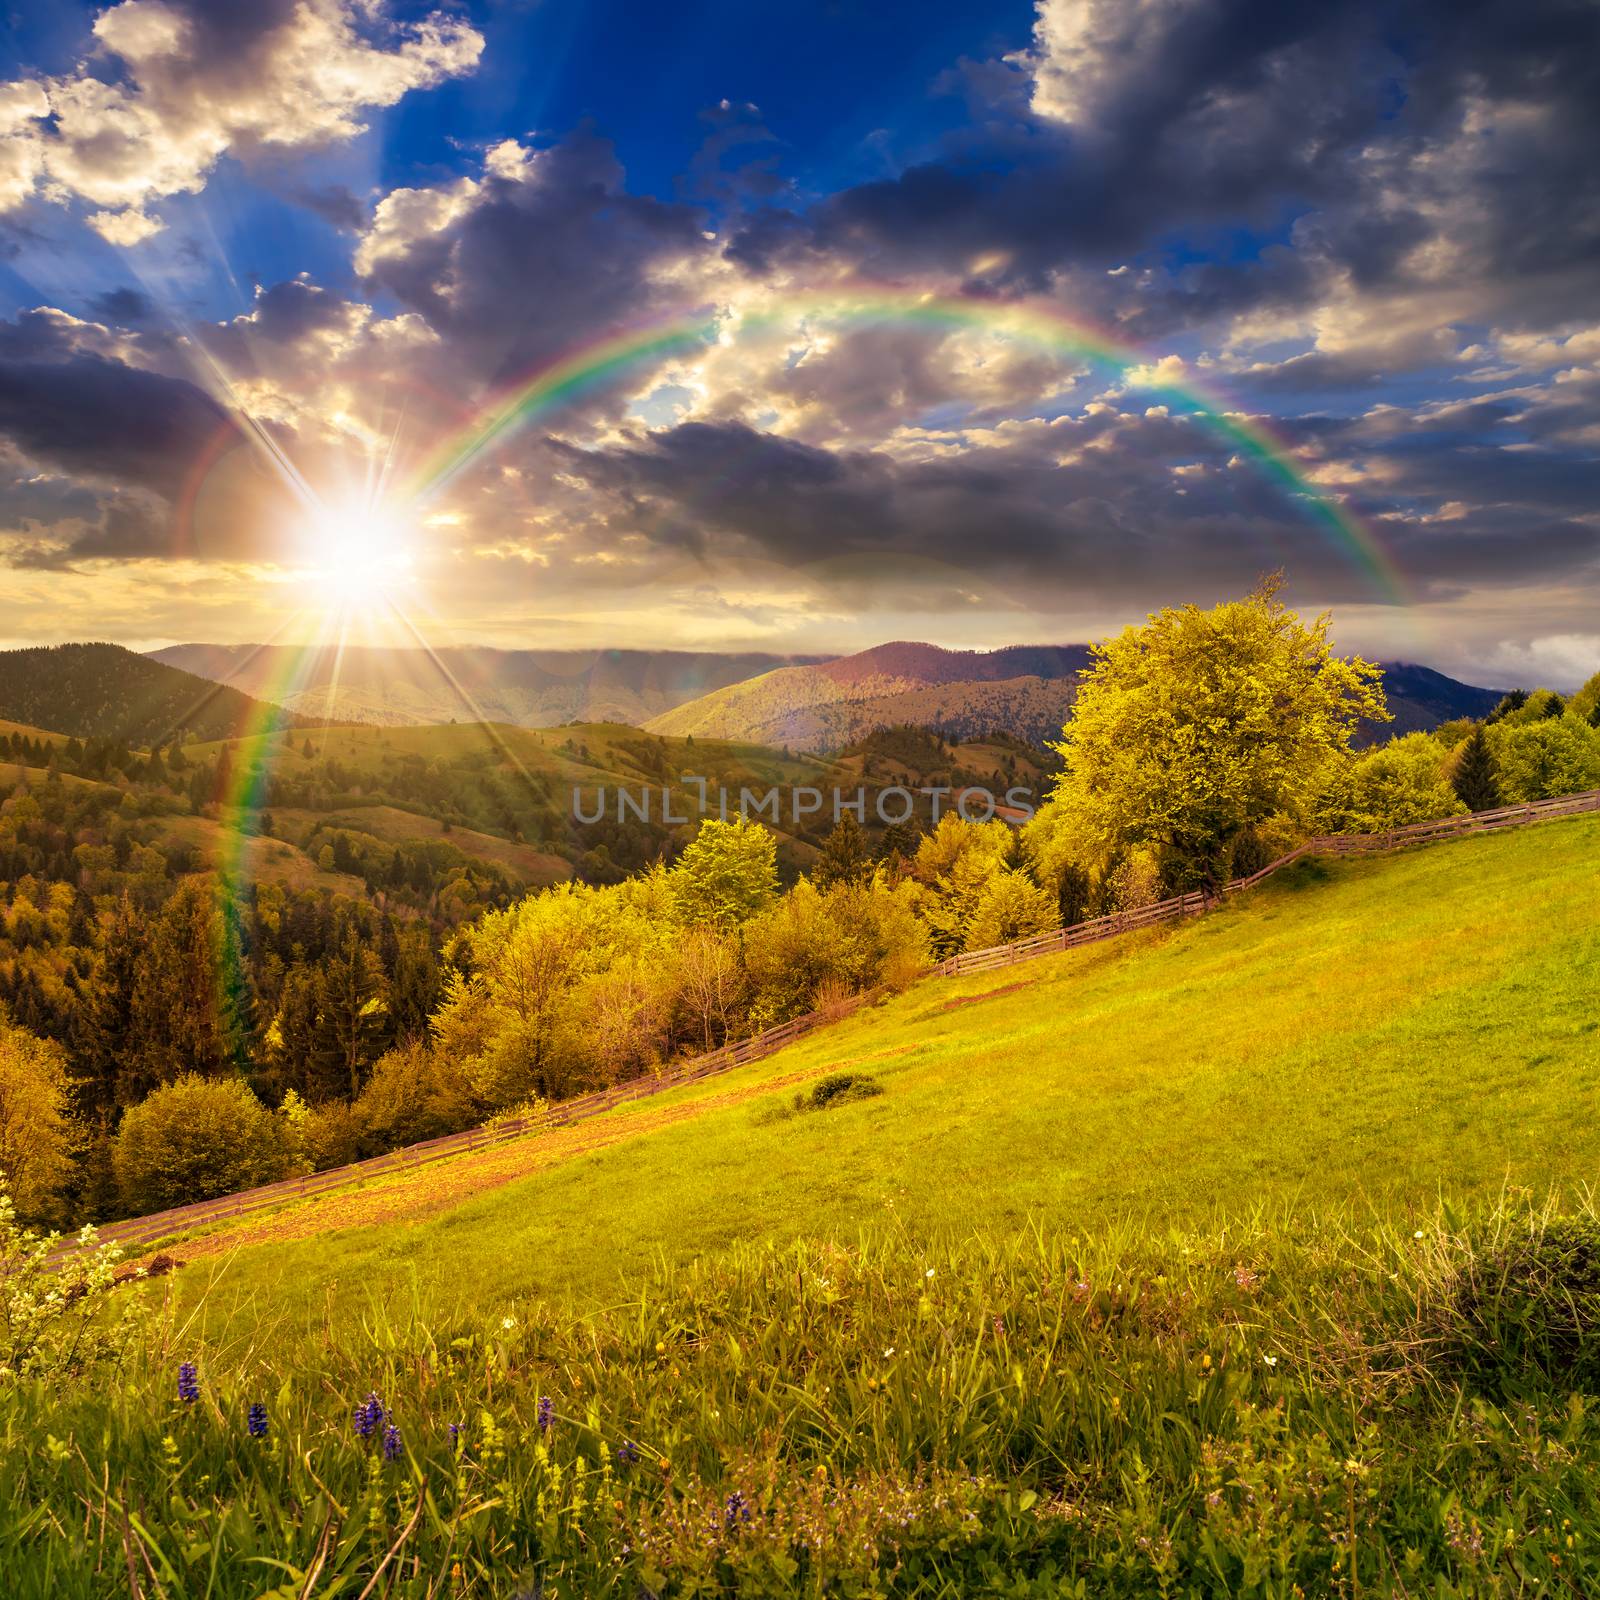 composite rural landscape. fence near the meadow and trees on the hillside. forest in fog on the mountain top in sunset light with rainbow